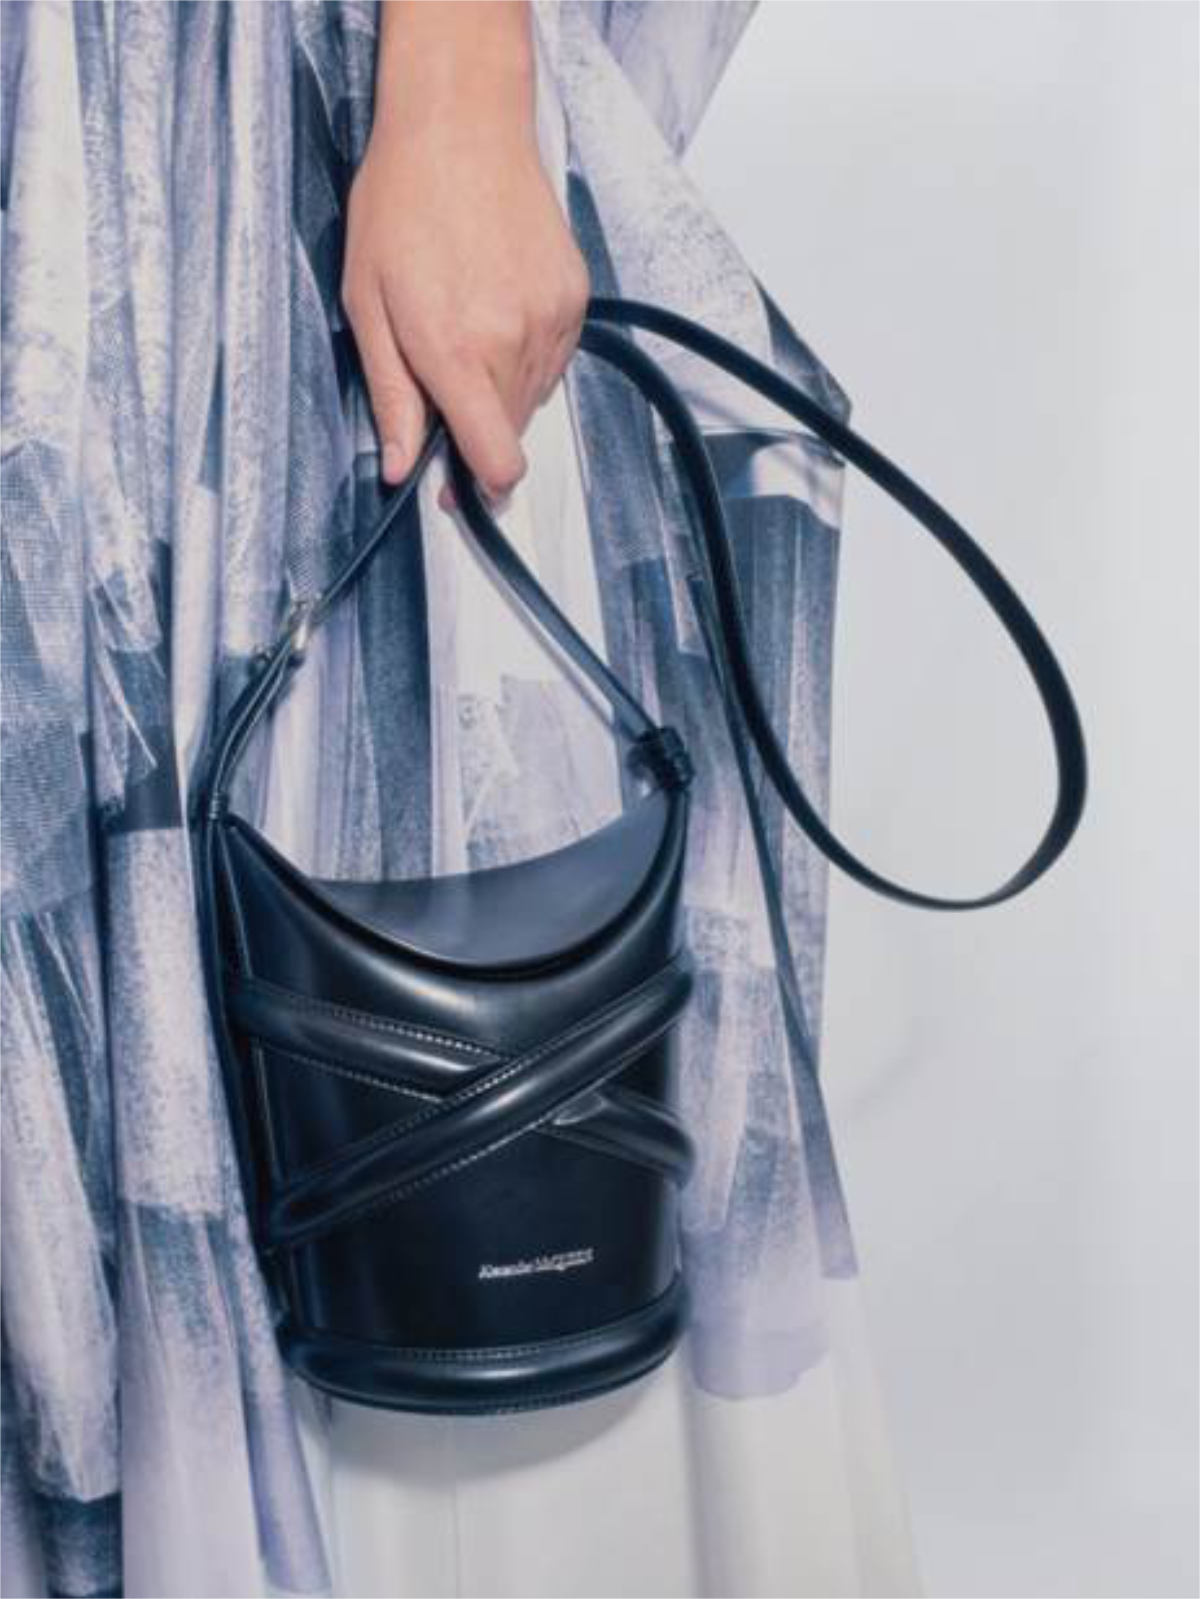 Alexander McQueen introduces its new Bag - The Curve